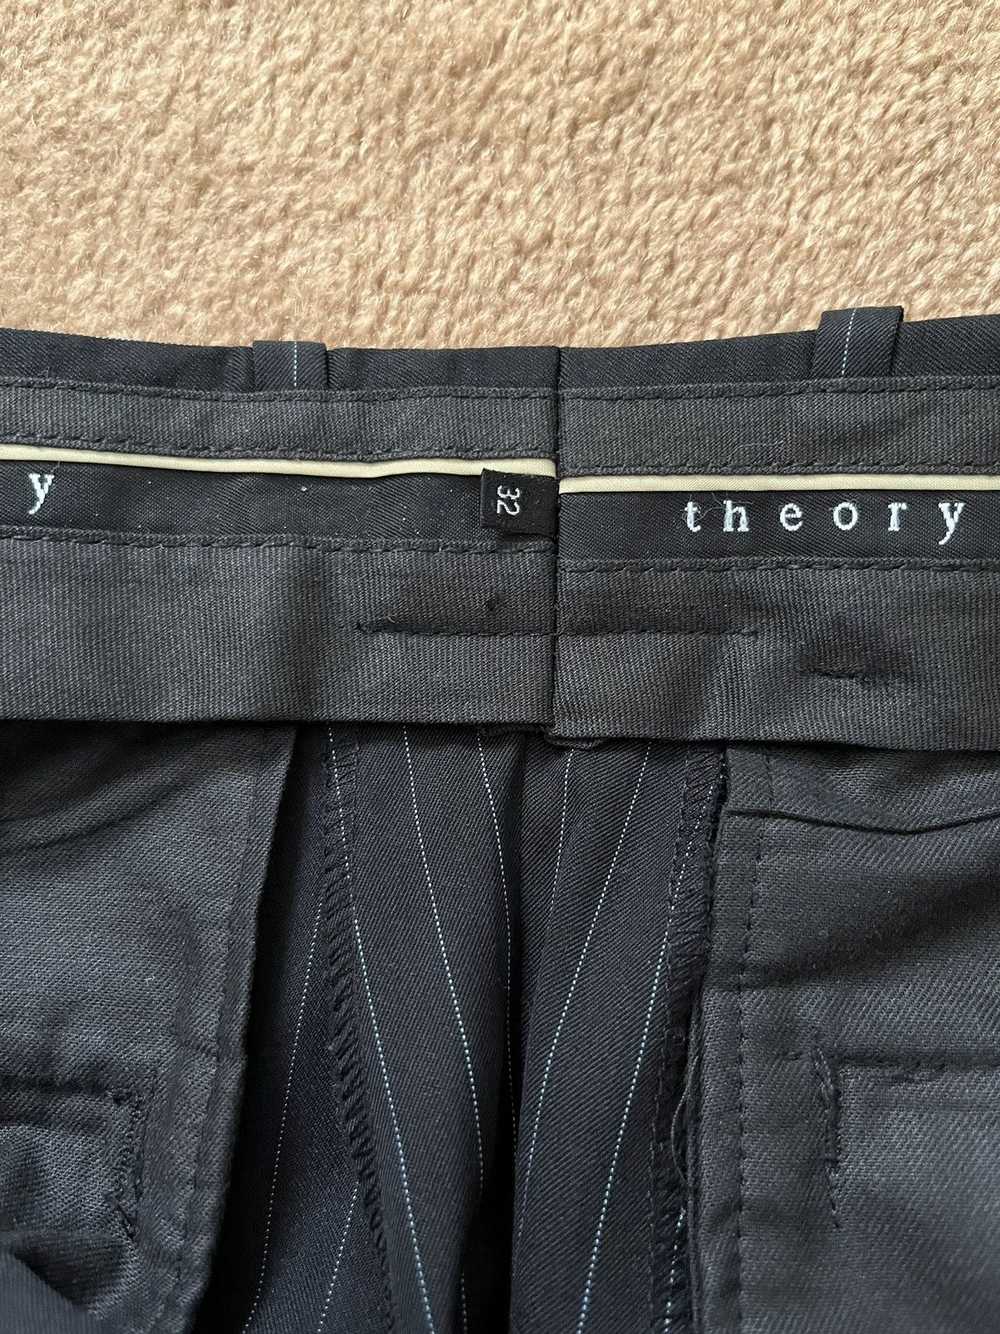 Theory Theory flared, pinstripe dressed pant - image 4